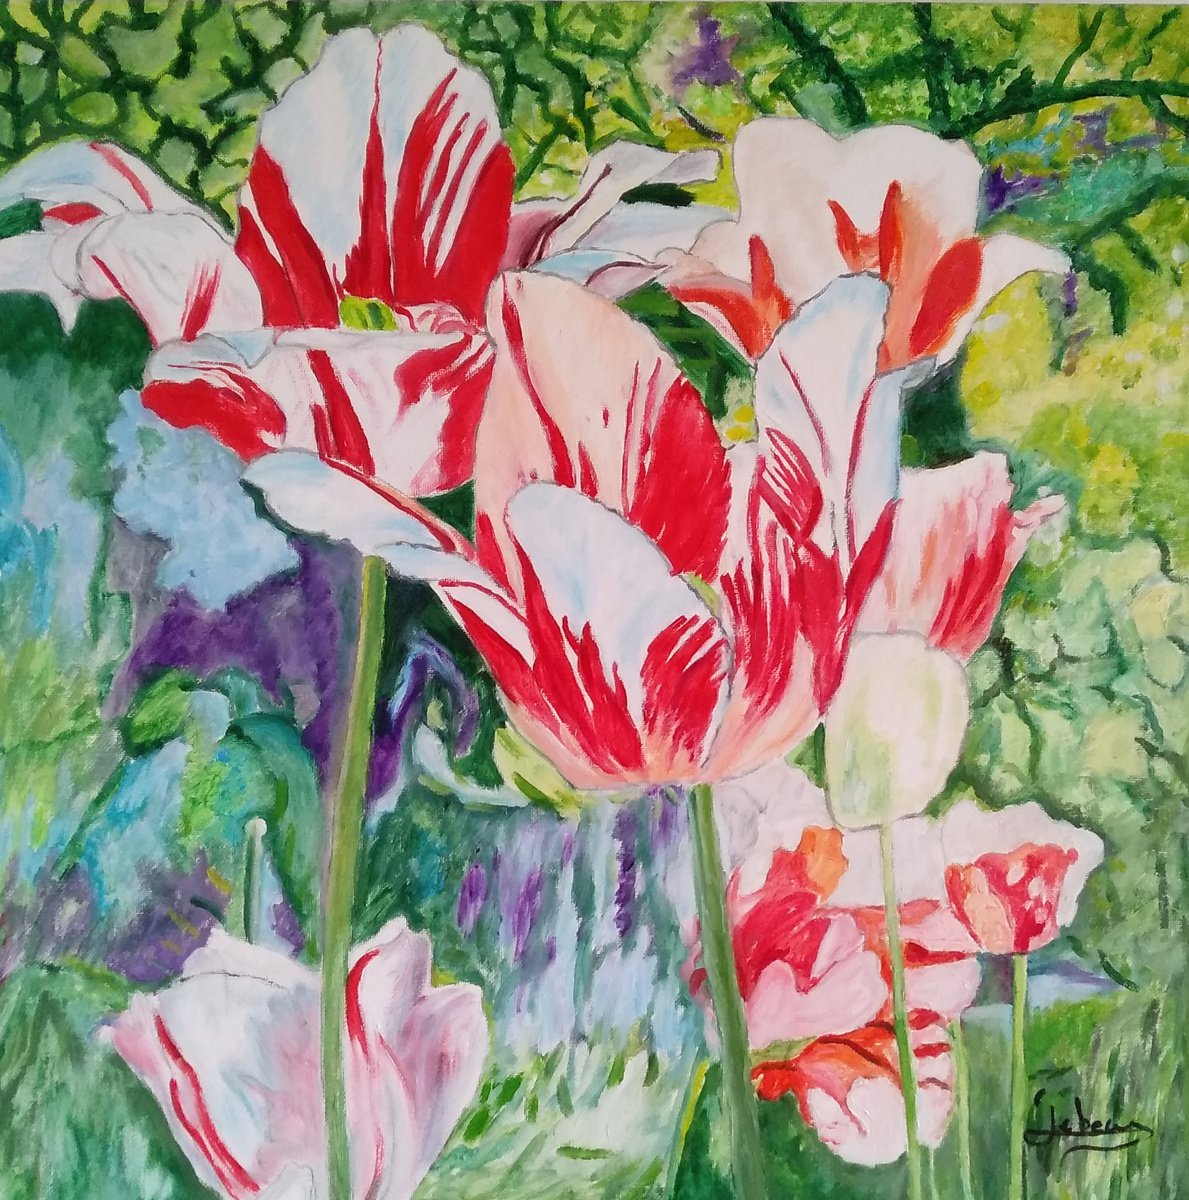 Tulips in the garden by Isabelle Lucas